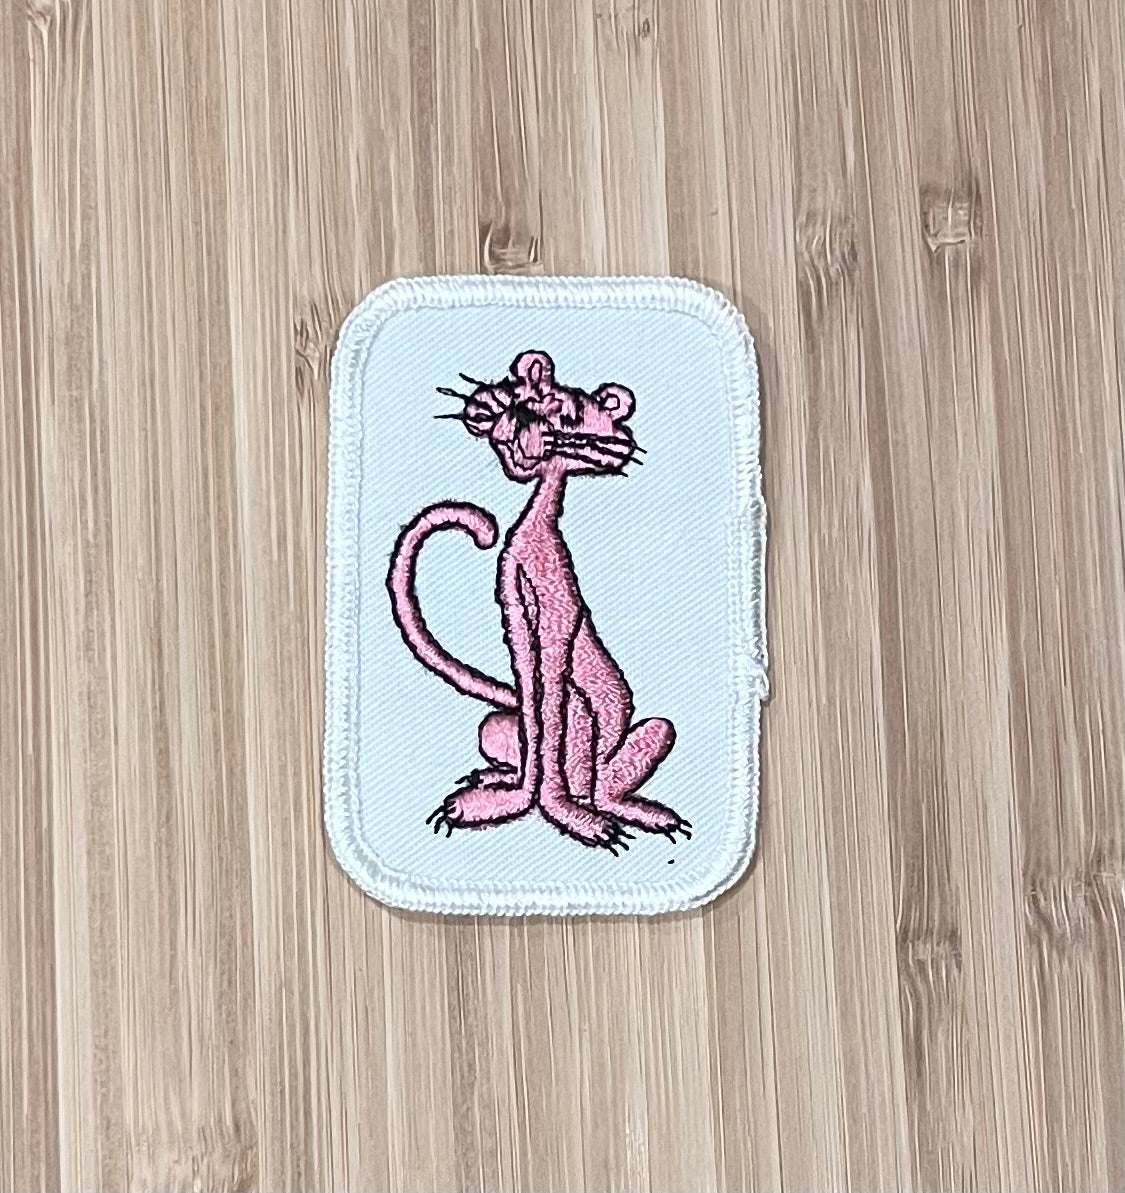 Pink Panther Patch vintage Character Rare Mint EXC. This patch measures approx 3 x 2 inches. The ever so clever Pink Panther! Great find, excellent vintage condition